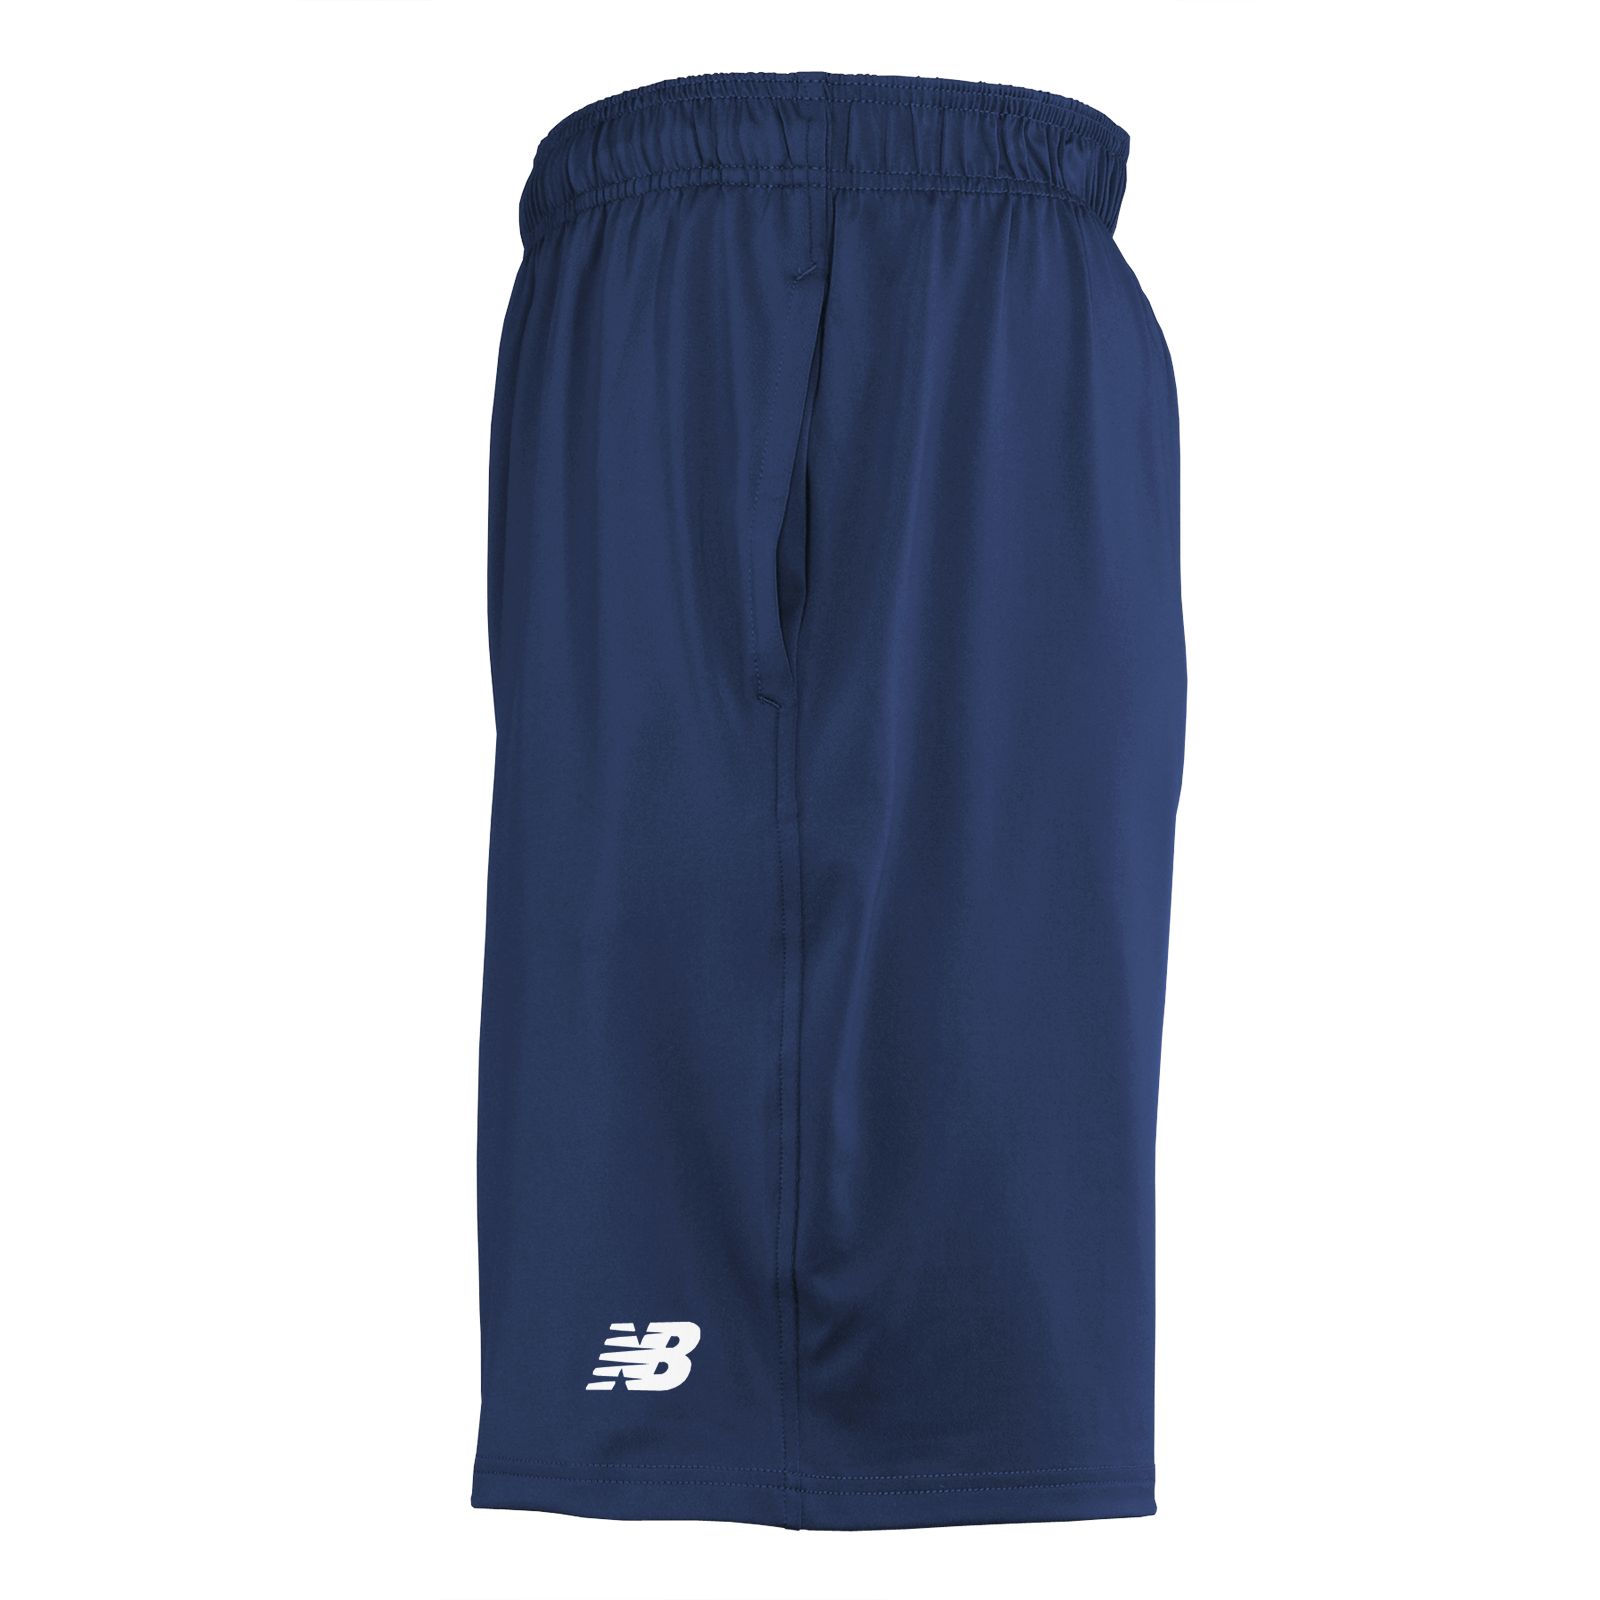 Youth Custom Tech Shorts, Team Navy image number 1